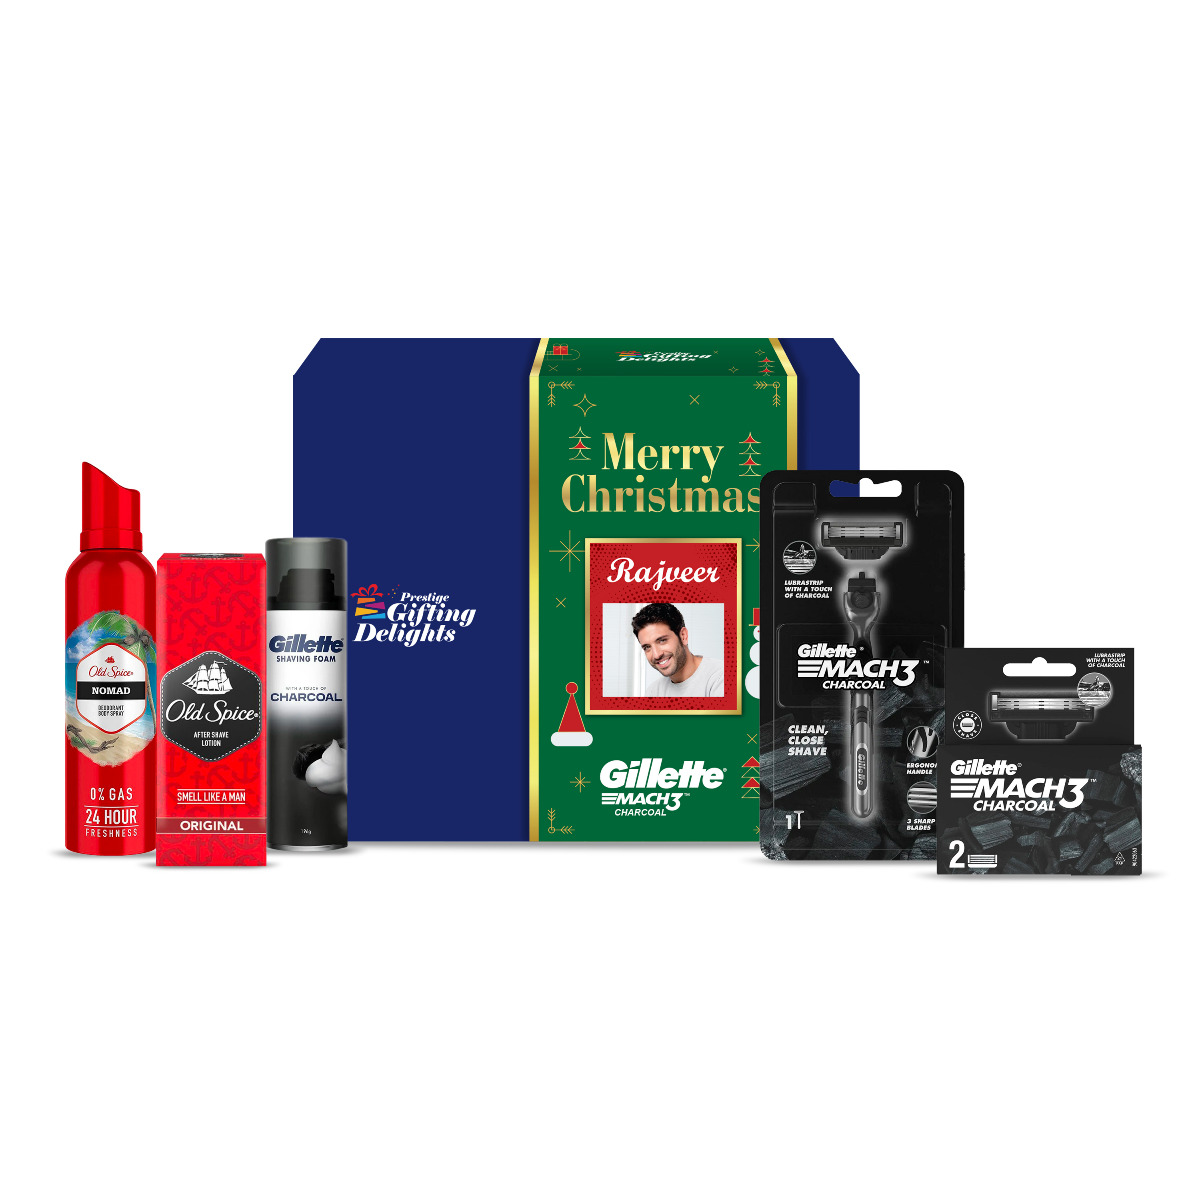 Gillette Mach3 Red Charcoal Christmas Gift Pack